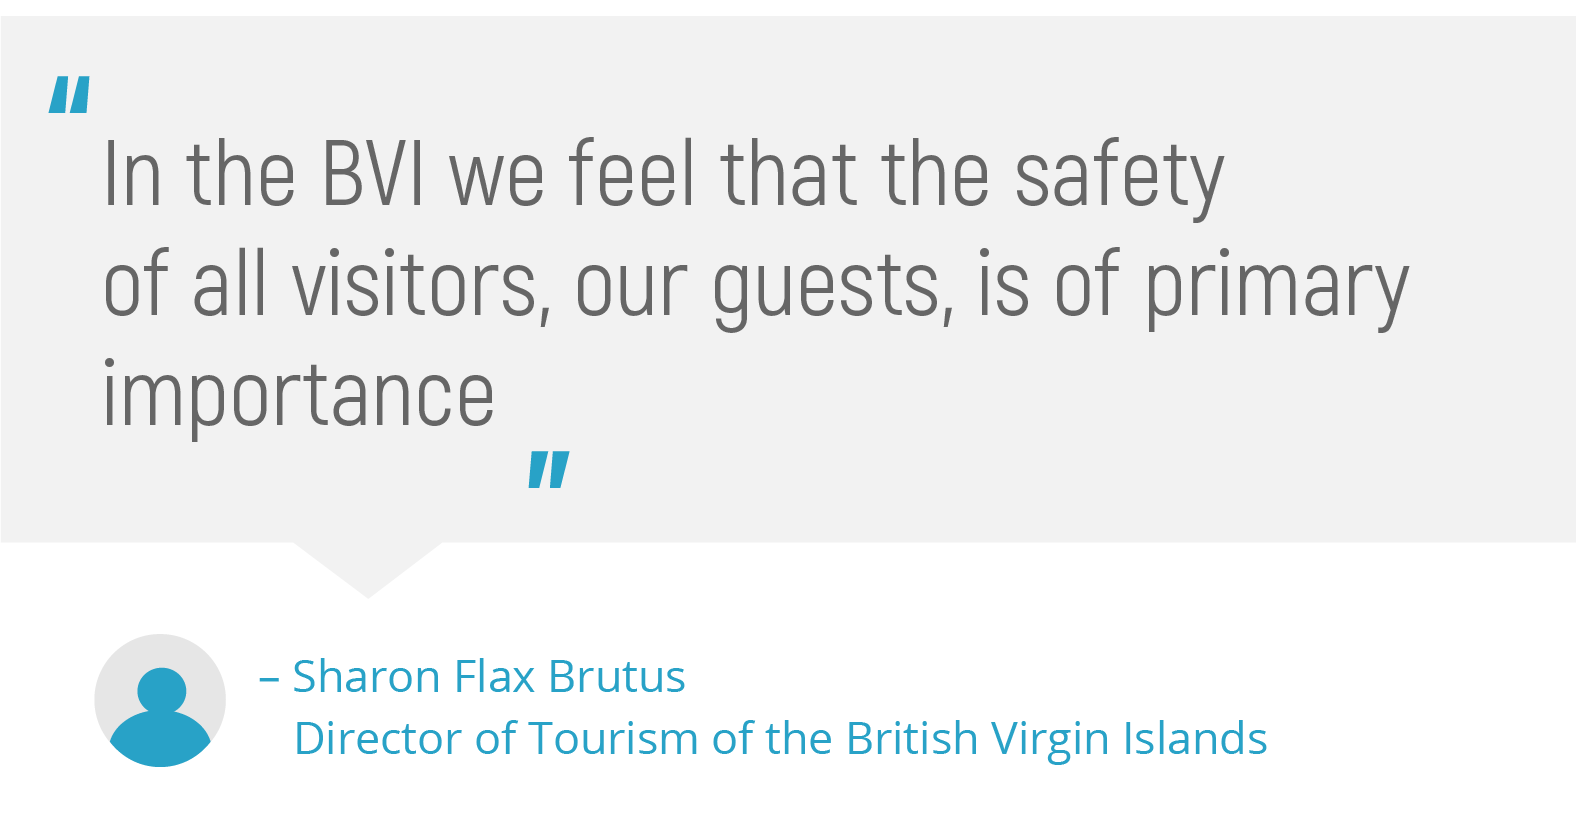 "In the BVI we feel that the safety of all visitors, our guests, is of primary importance."